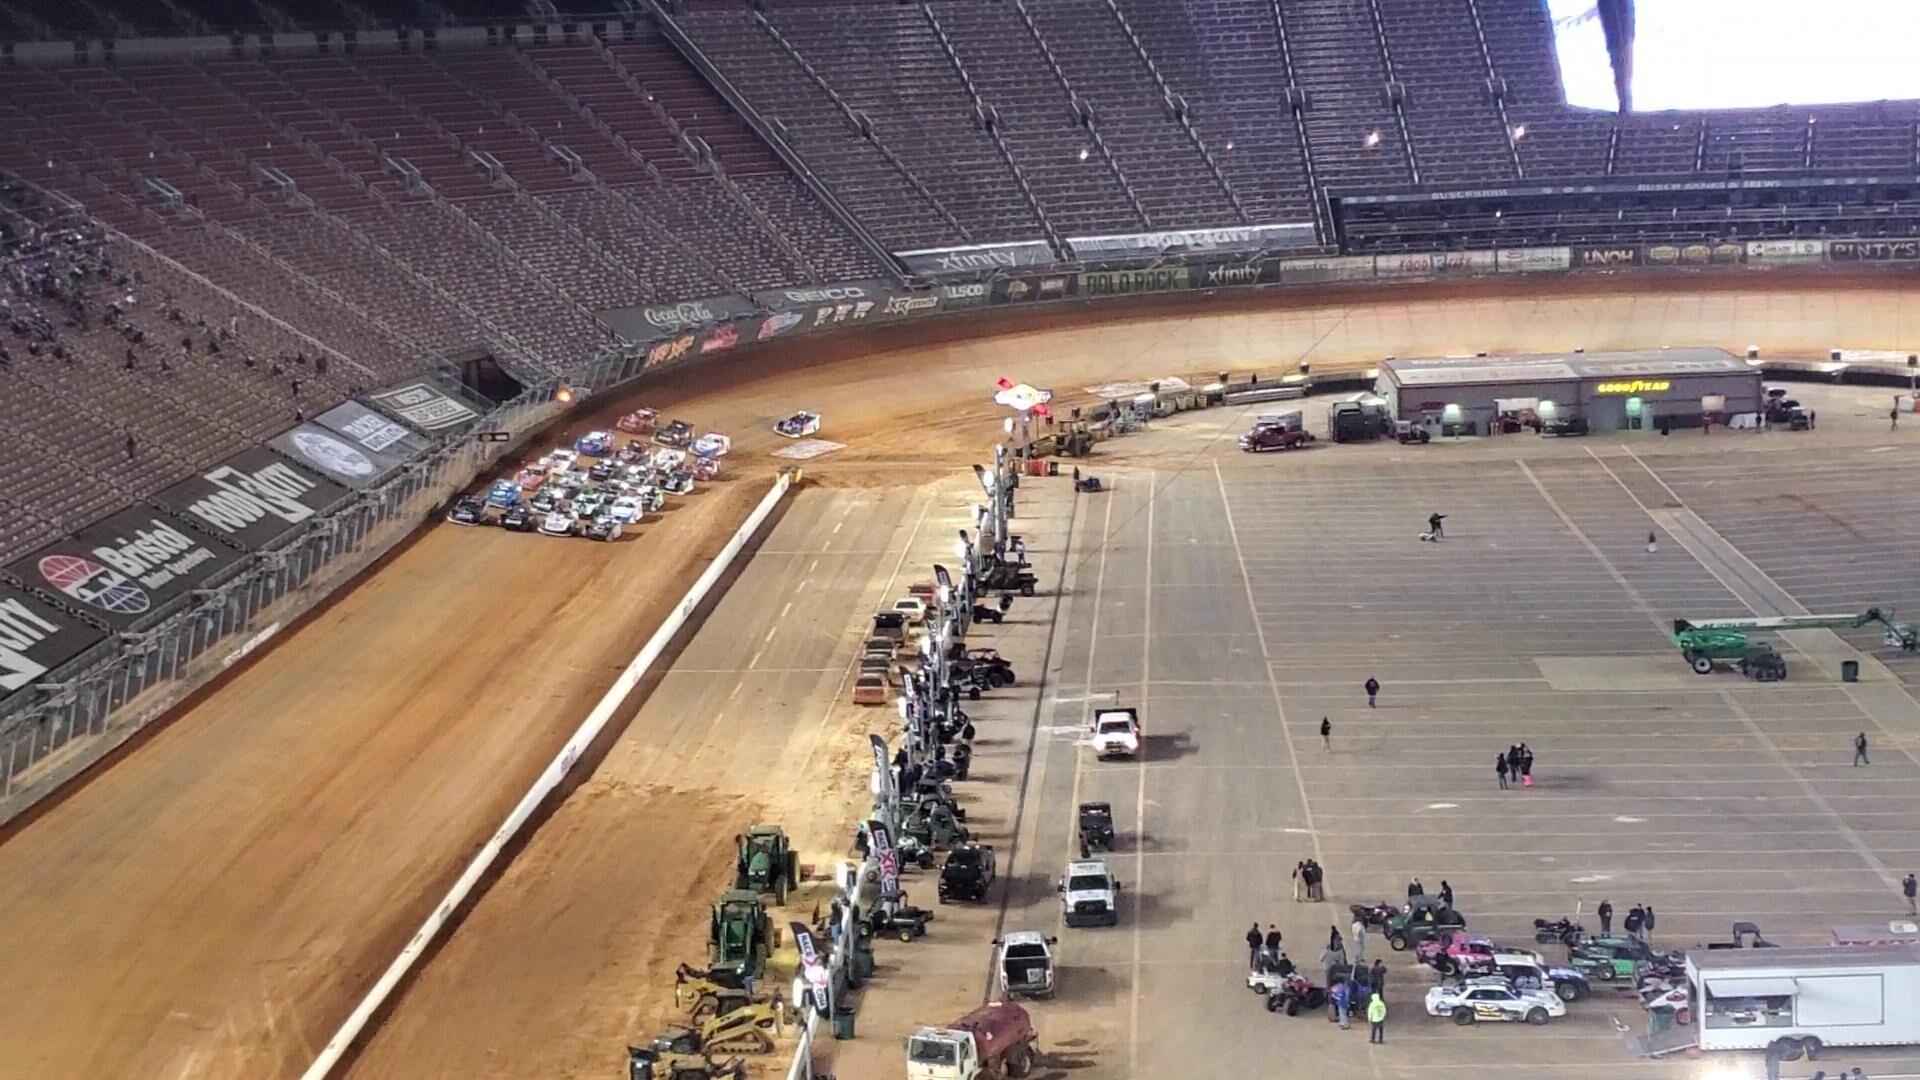 Four-wide salute at the Super Late Model race at the Bristol Dirt Nationals  johnsoncitypress